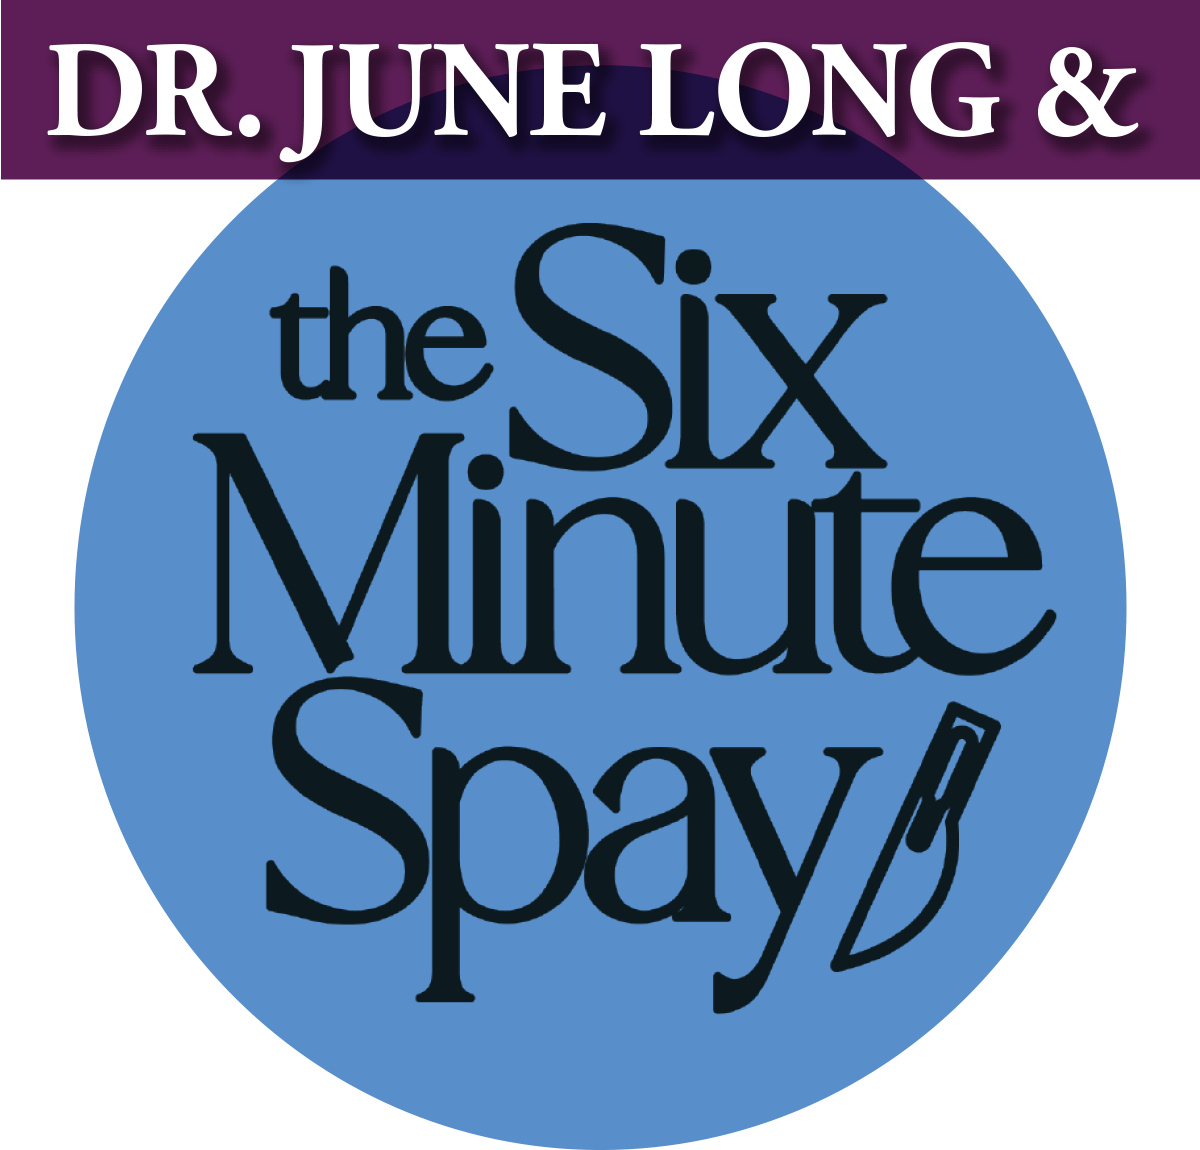 Dr. June Long & the Six Minute Spay